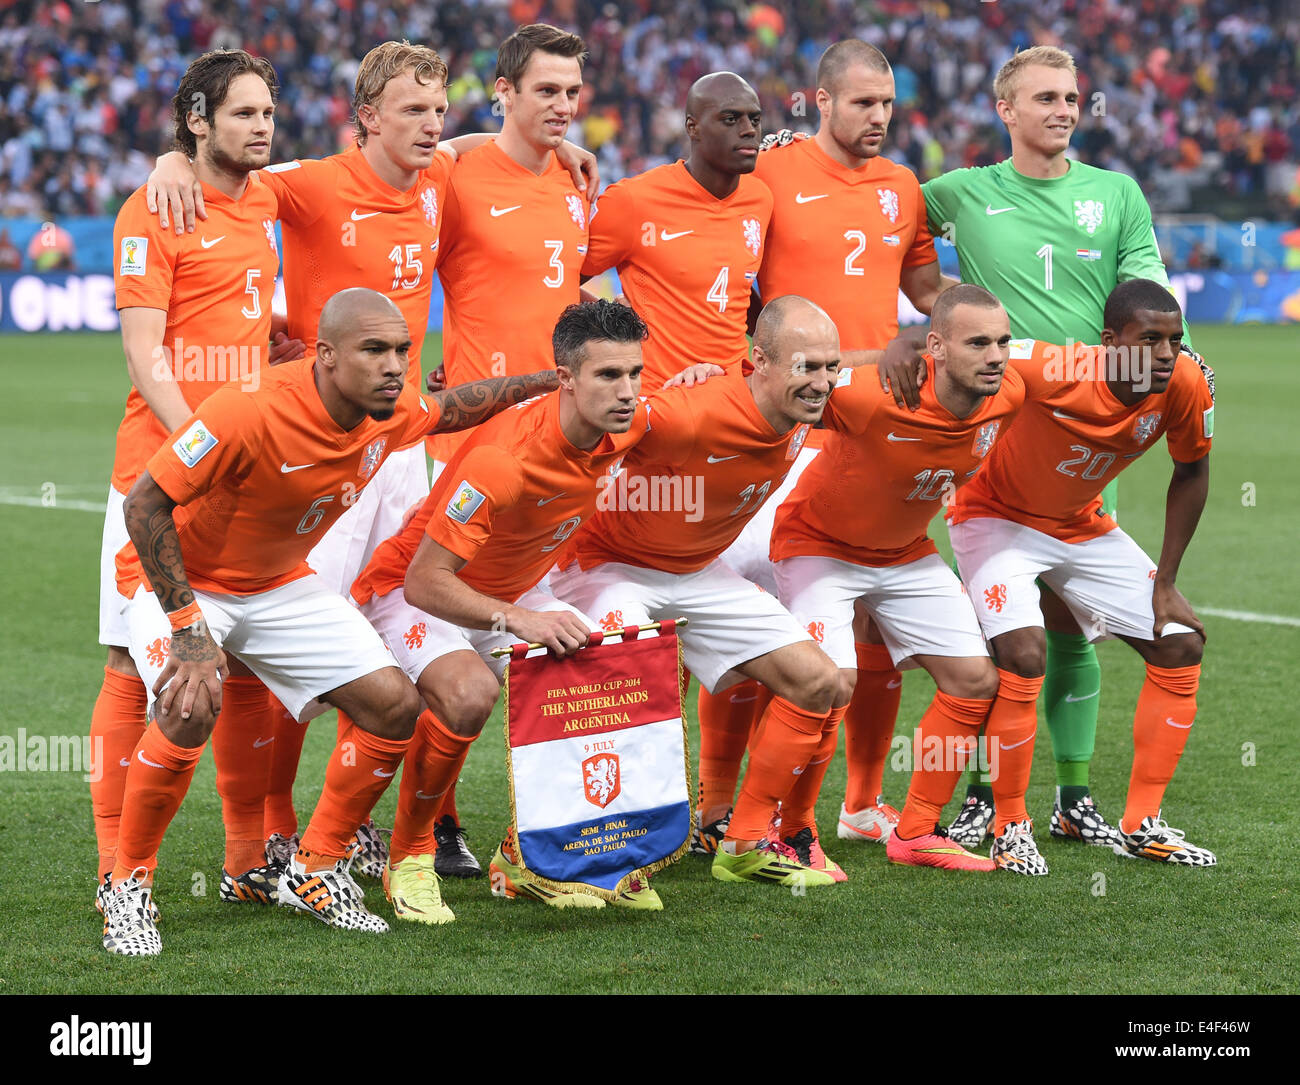 Sao Paulo, Brazil. 09th July, 2014. The Netherlands starting eleven (top L-R) Daley Blind, Dirk Kuyt, Stefan de Vrij, Bruno Martins Indi, Ron Vlaar, goalkeeper Jasper Cillessen, (bottom L-R) Nigel de Jong, Robin van Persie, Arjen Robben, Wesely Sneijder, and Georginio Wijnaldum pose for the group photo prior to the FIFA World Cup 2014 semi-final soccer match between the Netherlands and Argentina at the Arena Corinthians in Sao Paulo, Brazil, 09 July 2014. Photo: Marius Becker/dpa/Alamy Live News Stock Photo